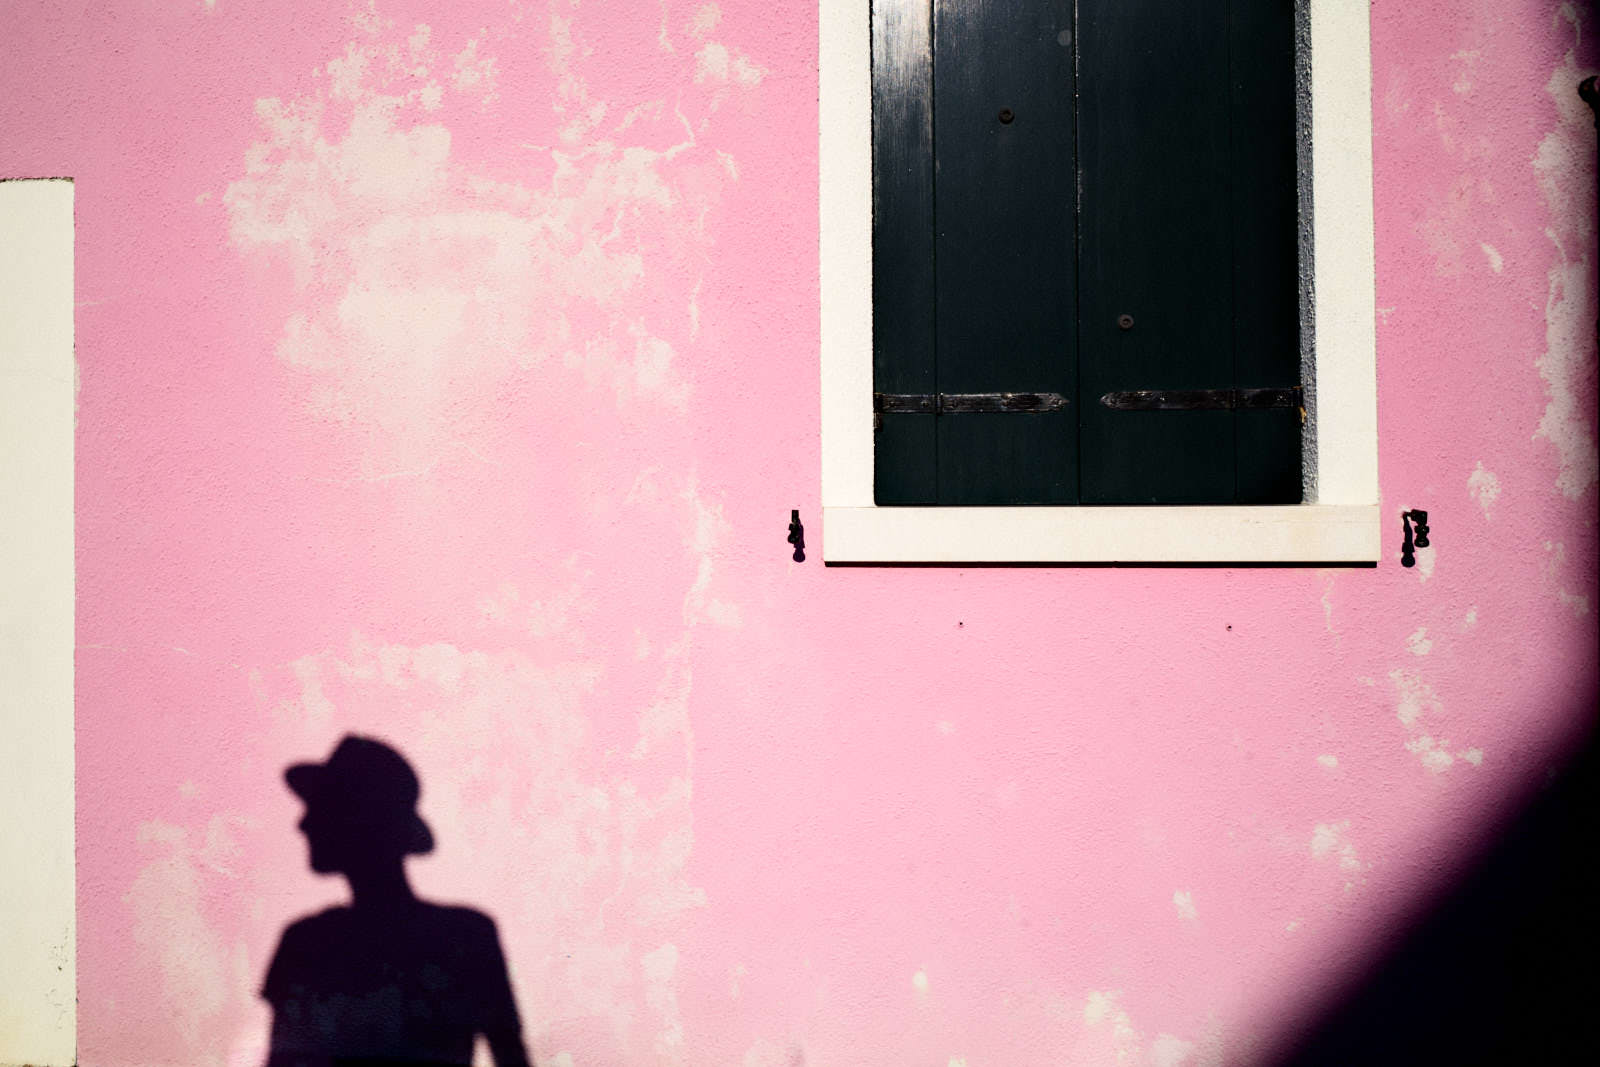 shadow of a man on a pink wall in burano venice italy